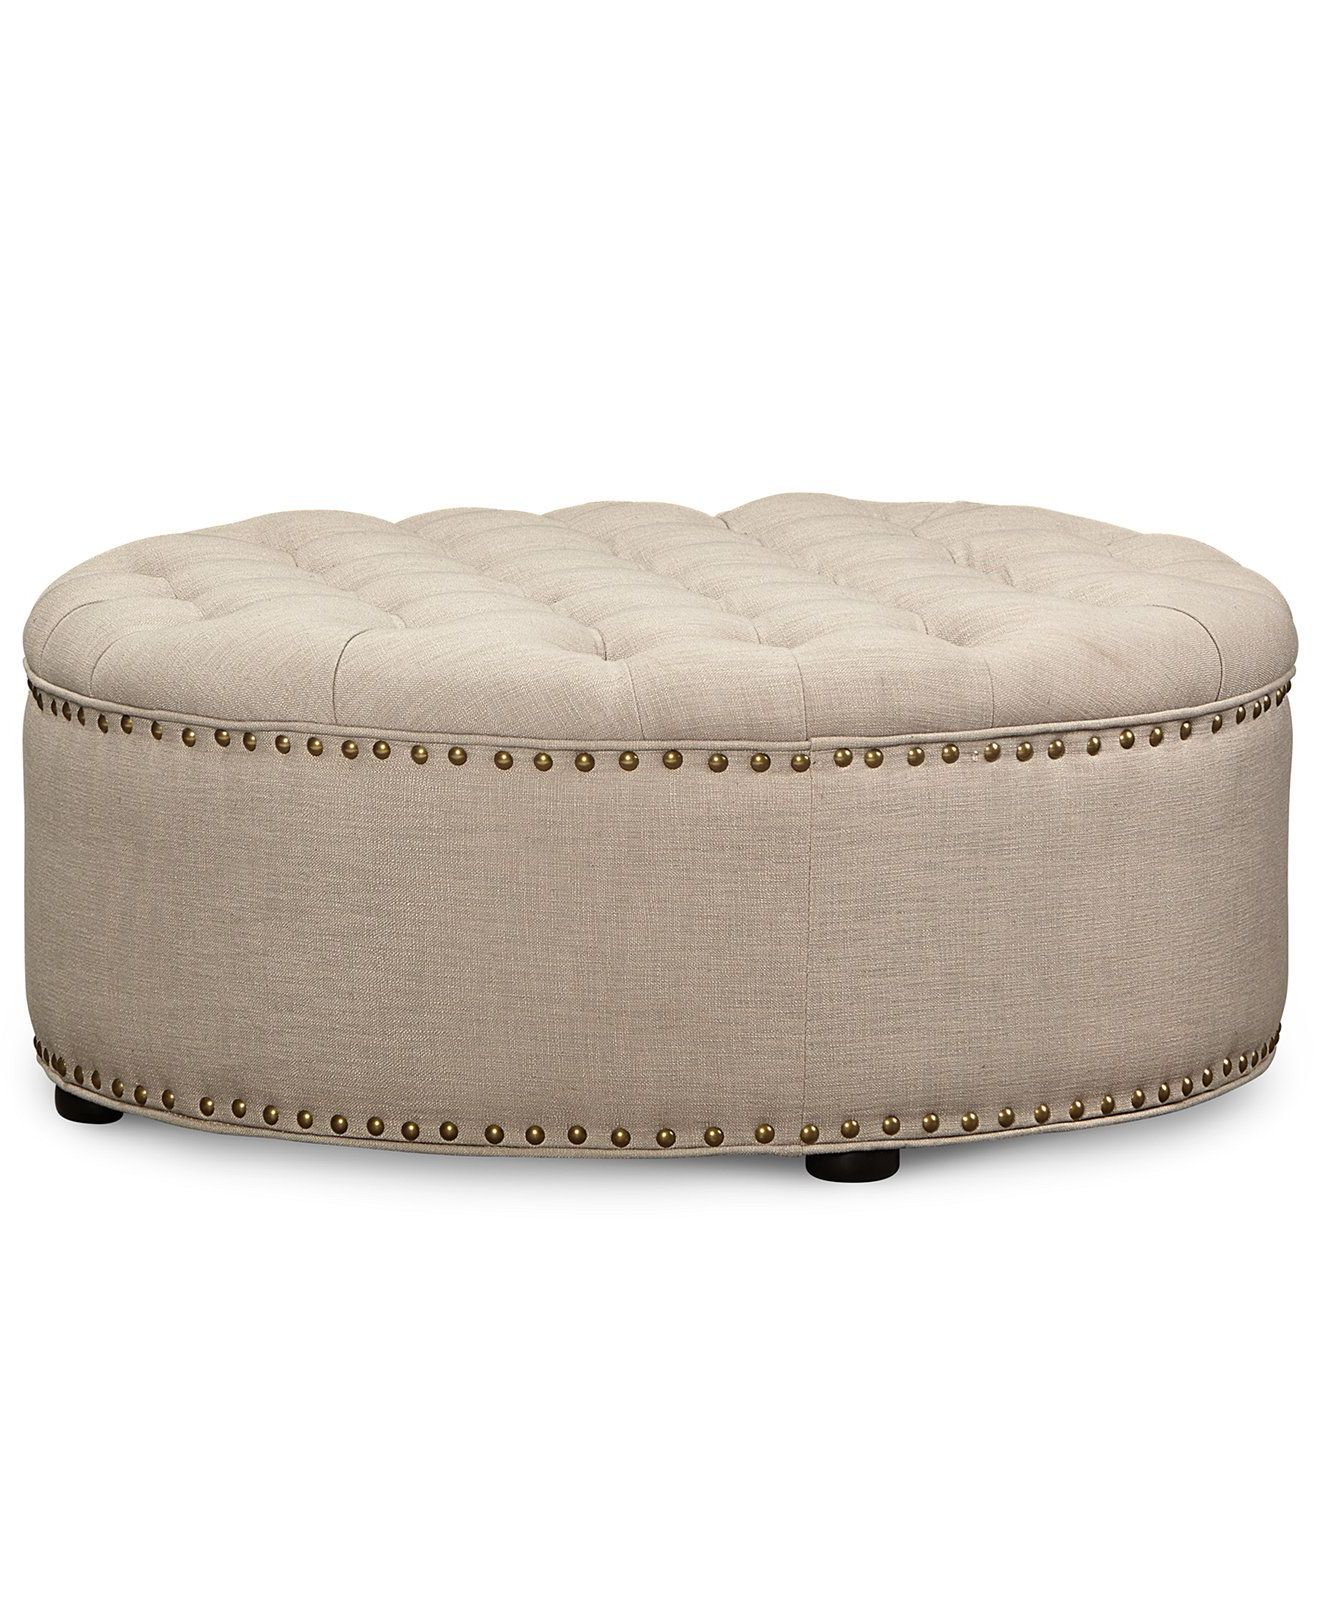 Tufted Fabric Ottomans Intended For 2019 Johanna Fabric Tufted Cocktail Ottoman, Direct Ship – Ottomans (View 8 of 10)